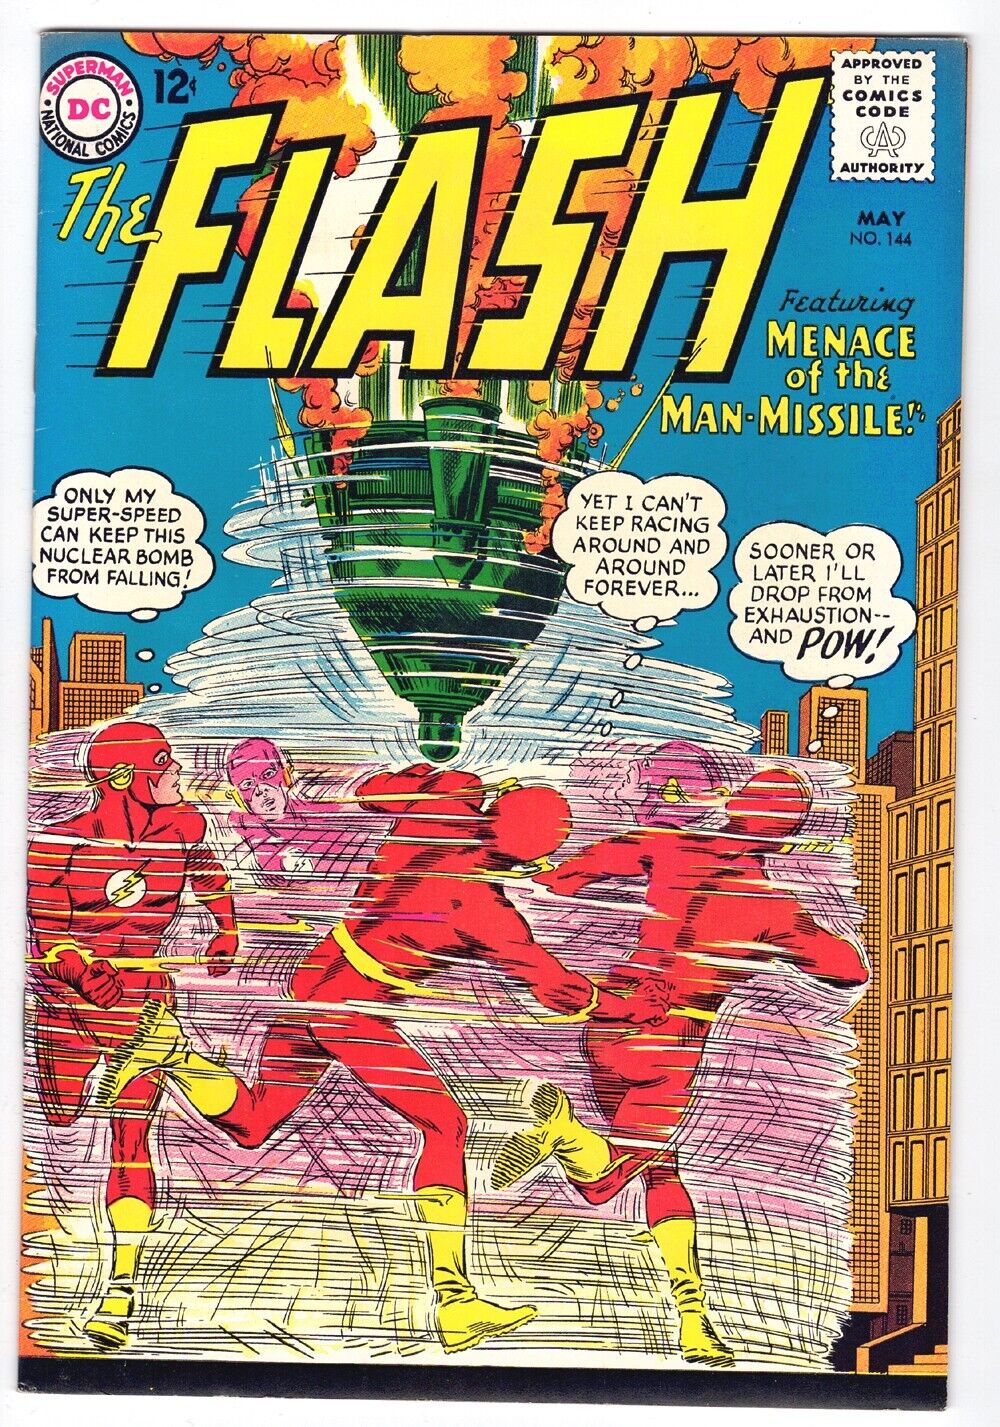 FLASH #144 8.0 HIGH GRADE 1964 OW/W PAGES GREG EIDE COLLECTION